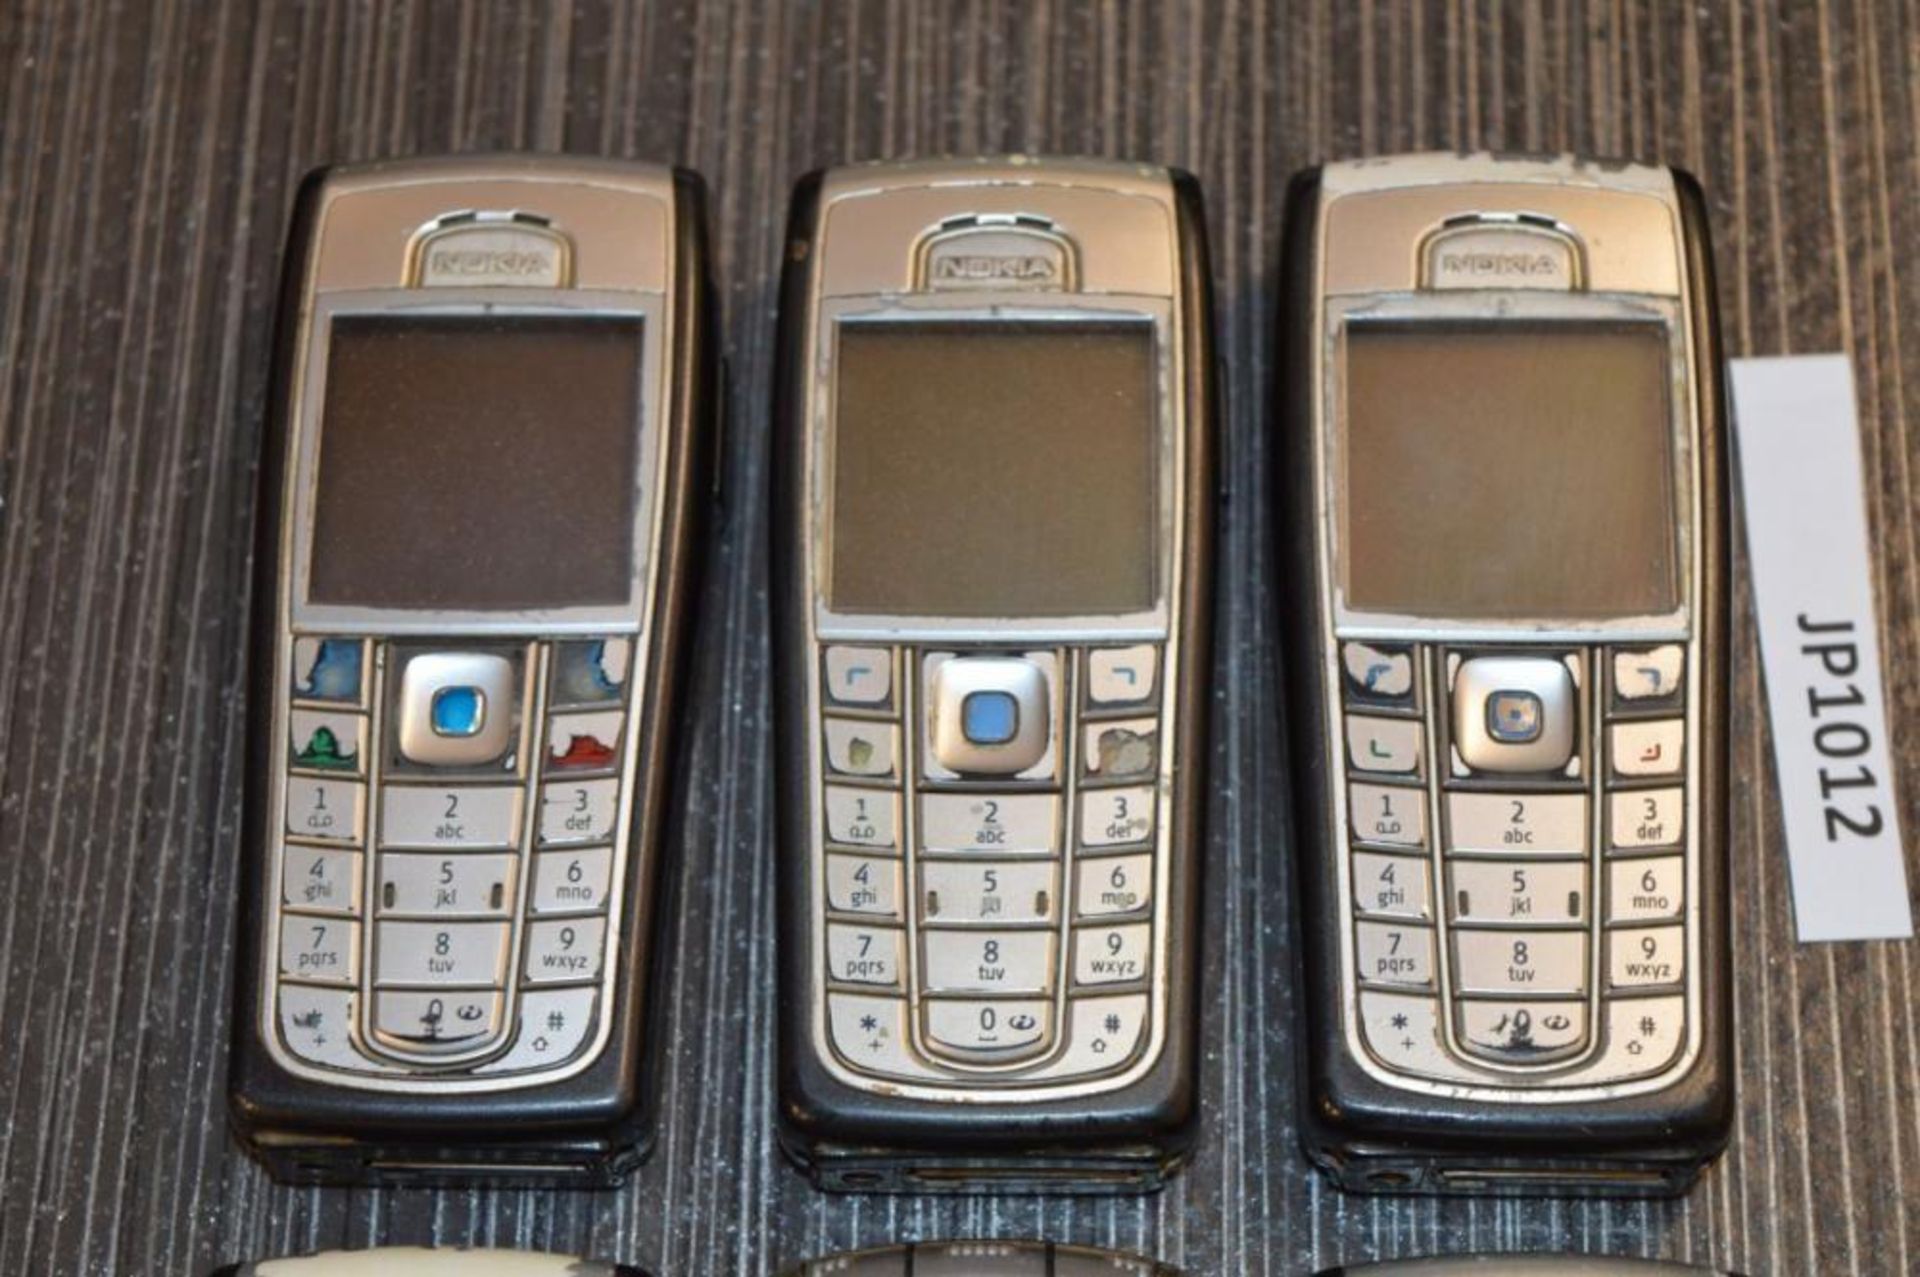 6 x Various NOKIA Mobile Phones - Removed From Company Closure - CL400 - Ref JP1012 - Location: Altr - Image 3 of 3